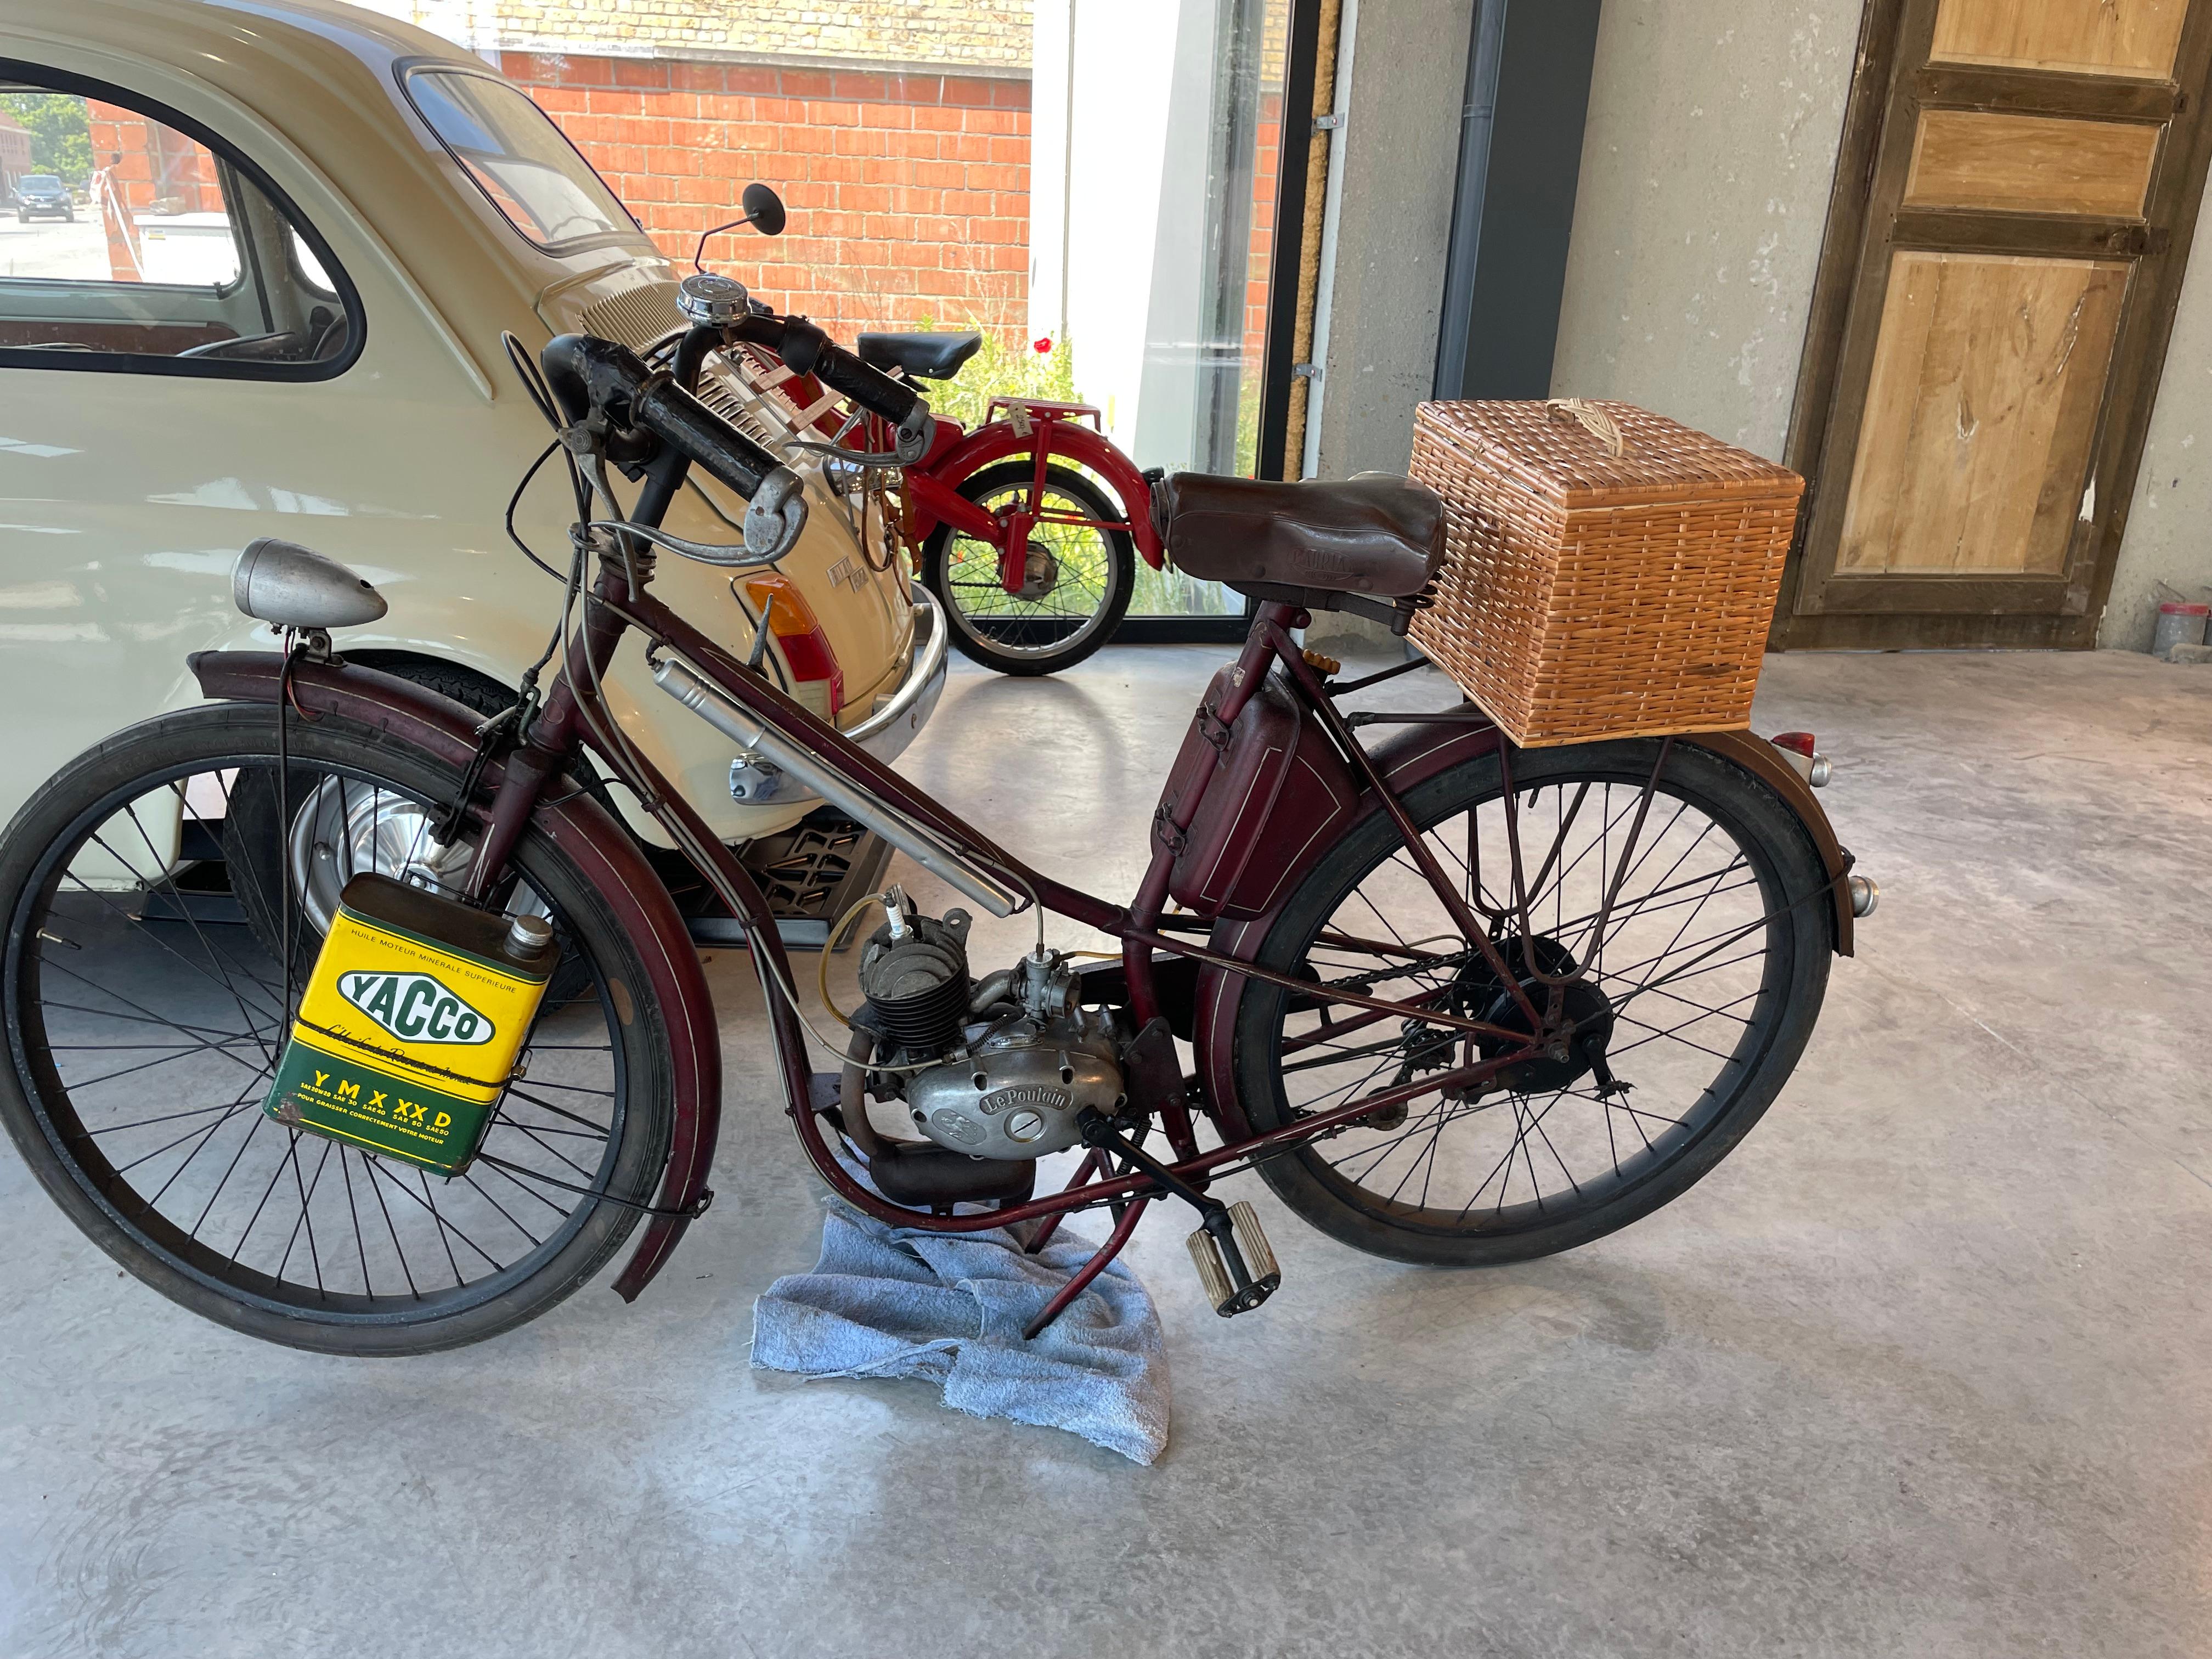 Decorative motorbike of the 50's - 60's, it does run but needs a bit of tender loving care, a truly fun item.